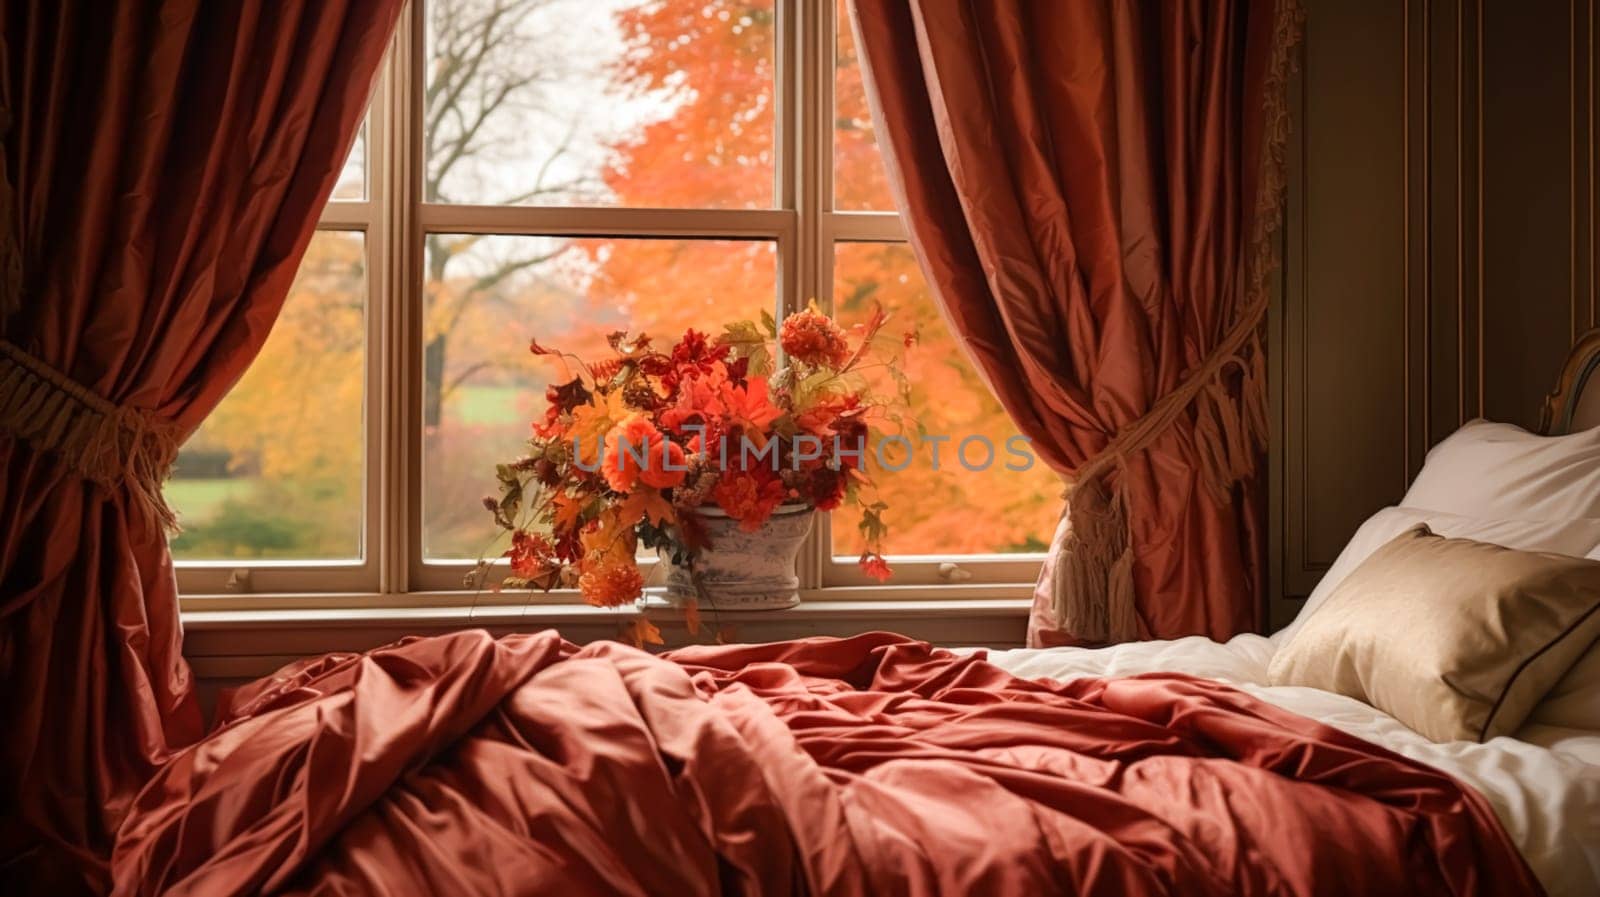 Bedroom decor, interior design and autumnal home decor, bed with silk satin bedding, bespoke furniture and autumn decoration, English country house, holiday rental and cottage style idea